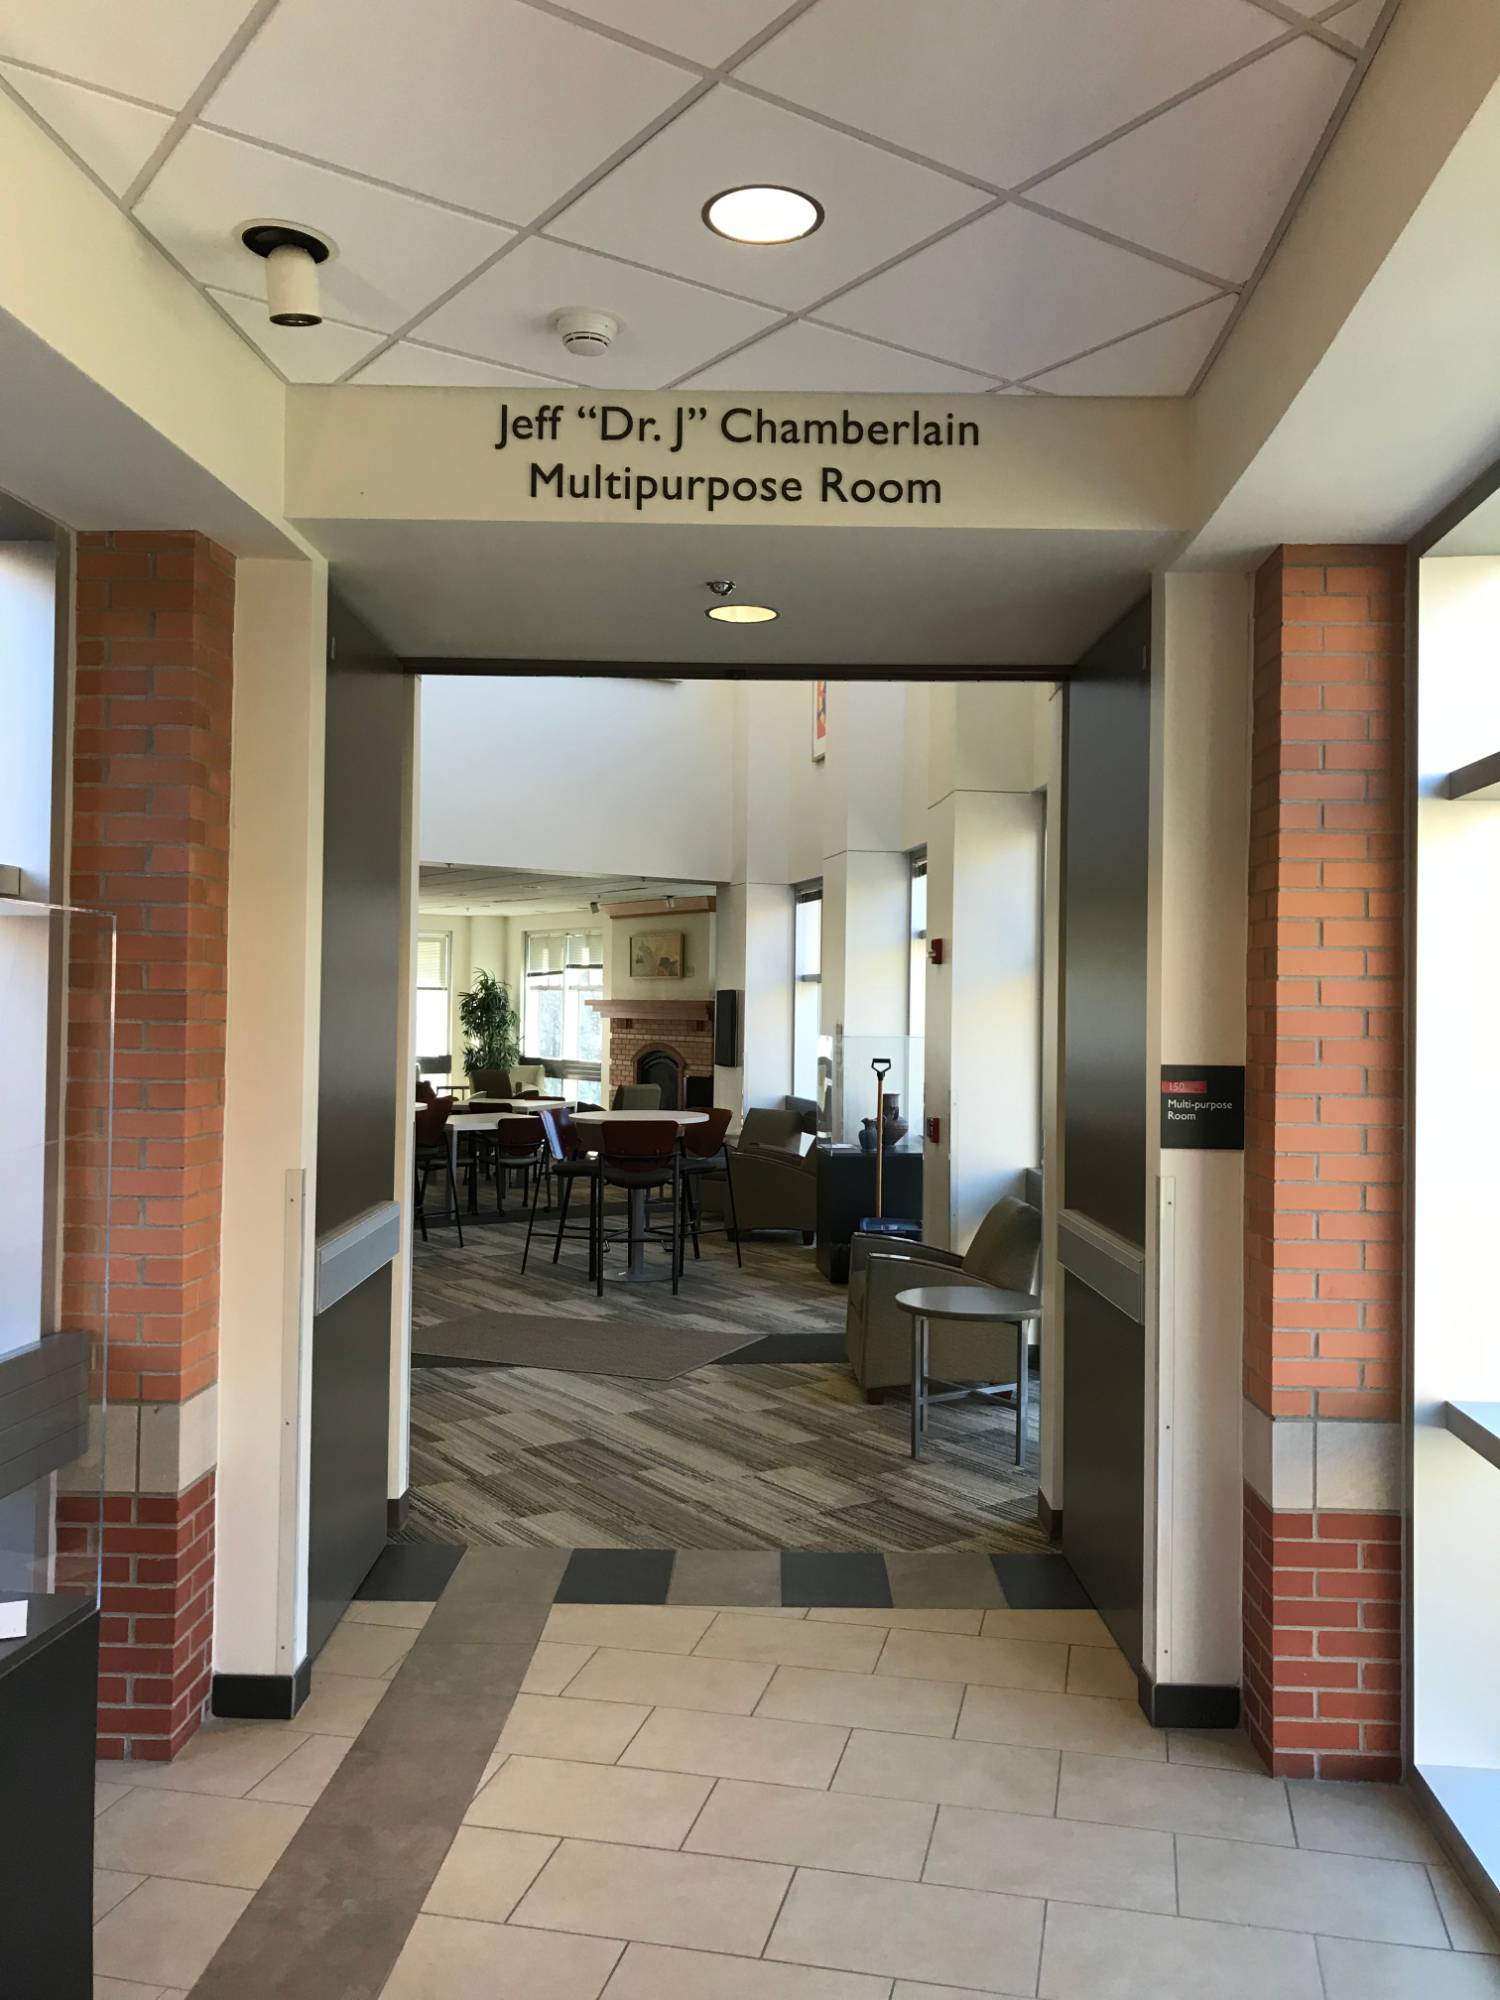 new sign at the entrance to the Chamberlain Multipurpose Room